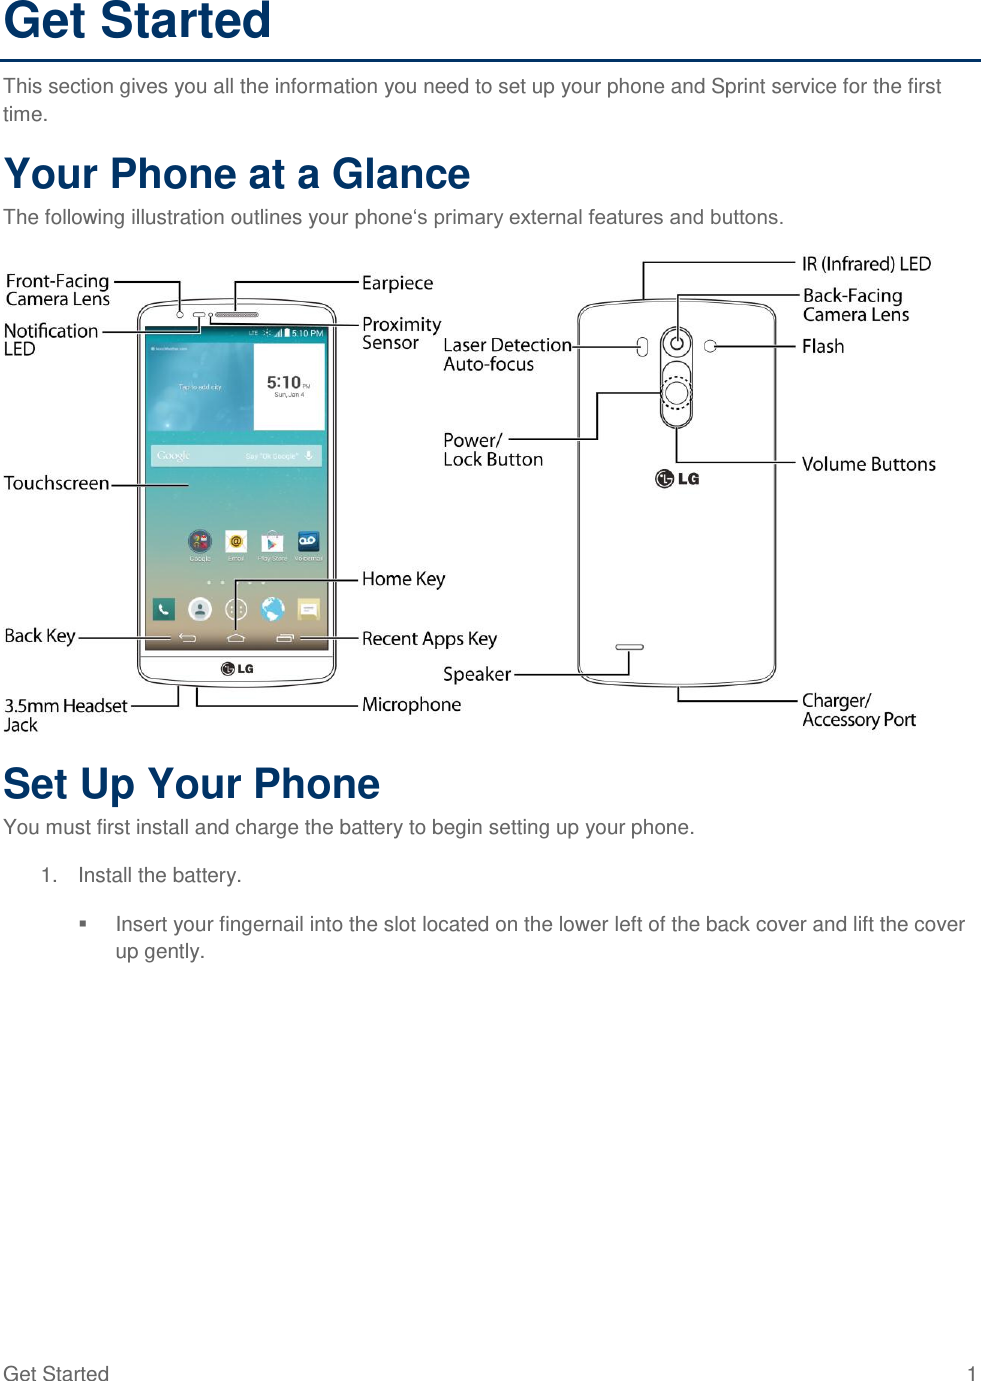 Get Started  1 Get Started This section gives you all the information you need to set up your phone and Sprint service for the first time. Your Phone at a Glance The following illustration outlines your phone‗s primary external features and buttons.  Set Up Your Phone You must first install and charge the battery to begin setting up your phone. 1.  Install the battery.   Insert your fingernail into the slot located on the lower left of the back cover and lift the cover up gently. 